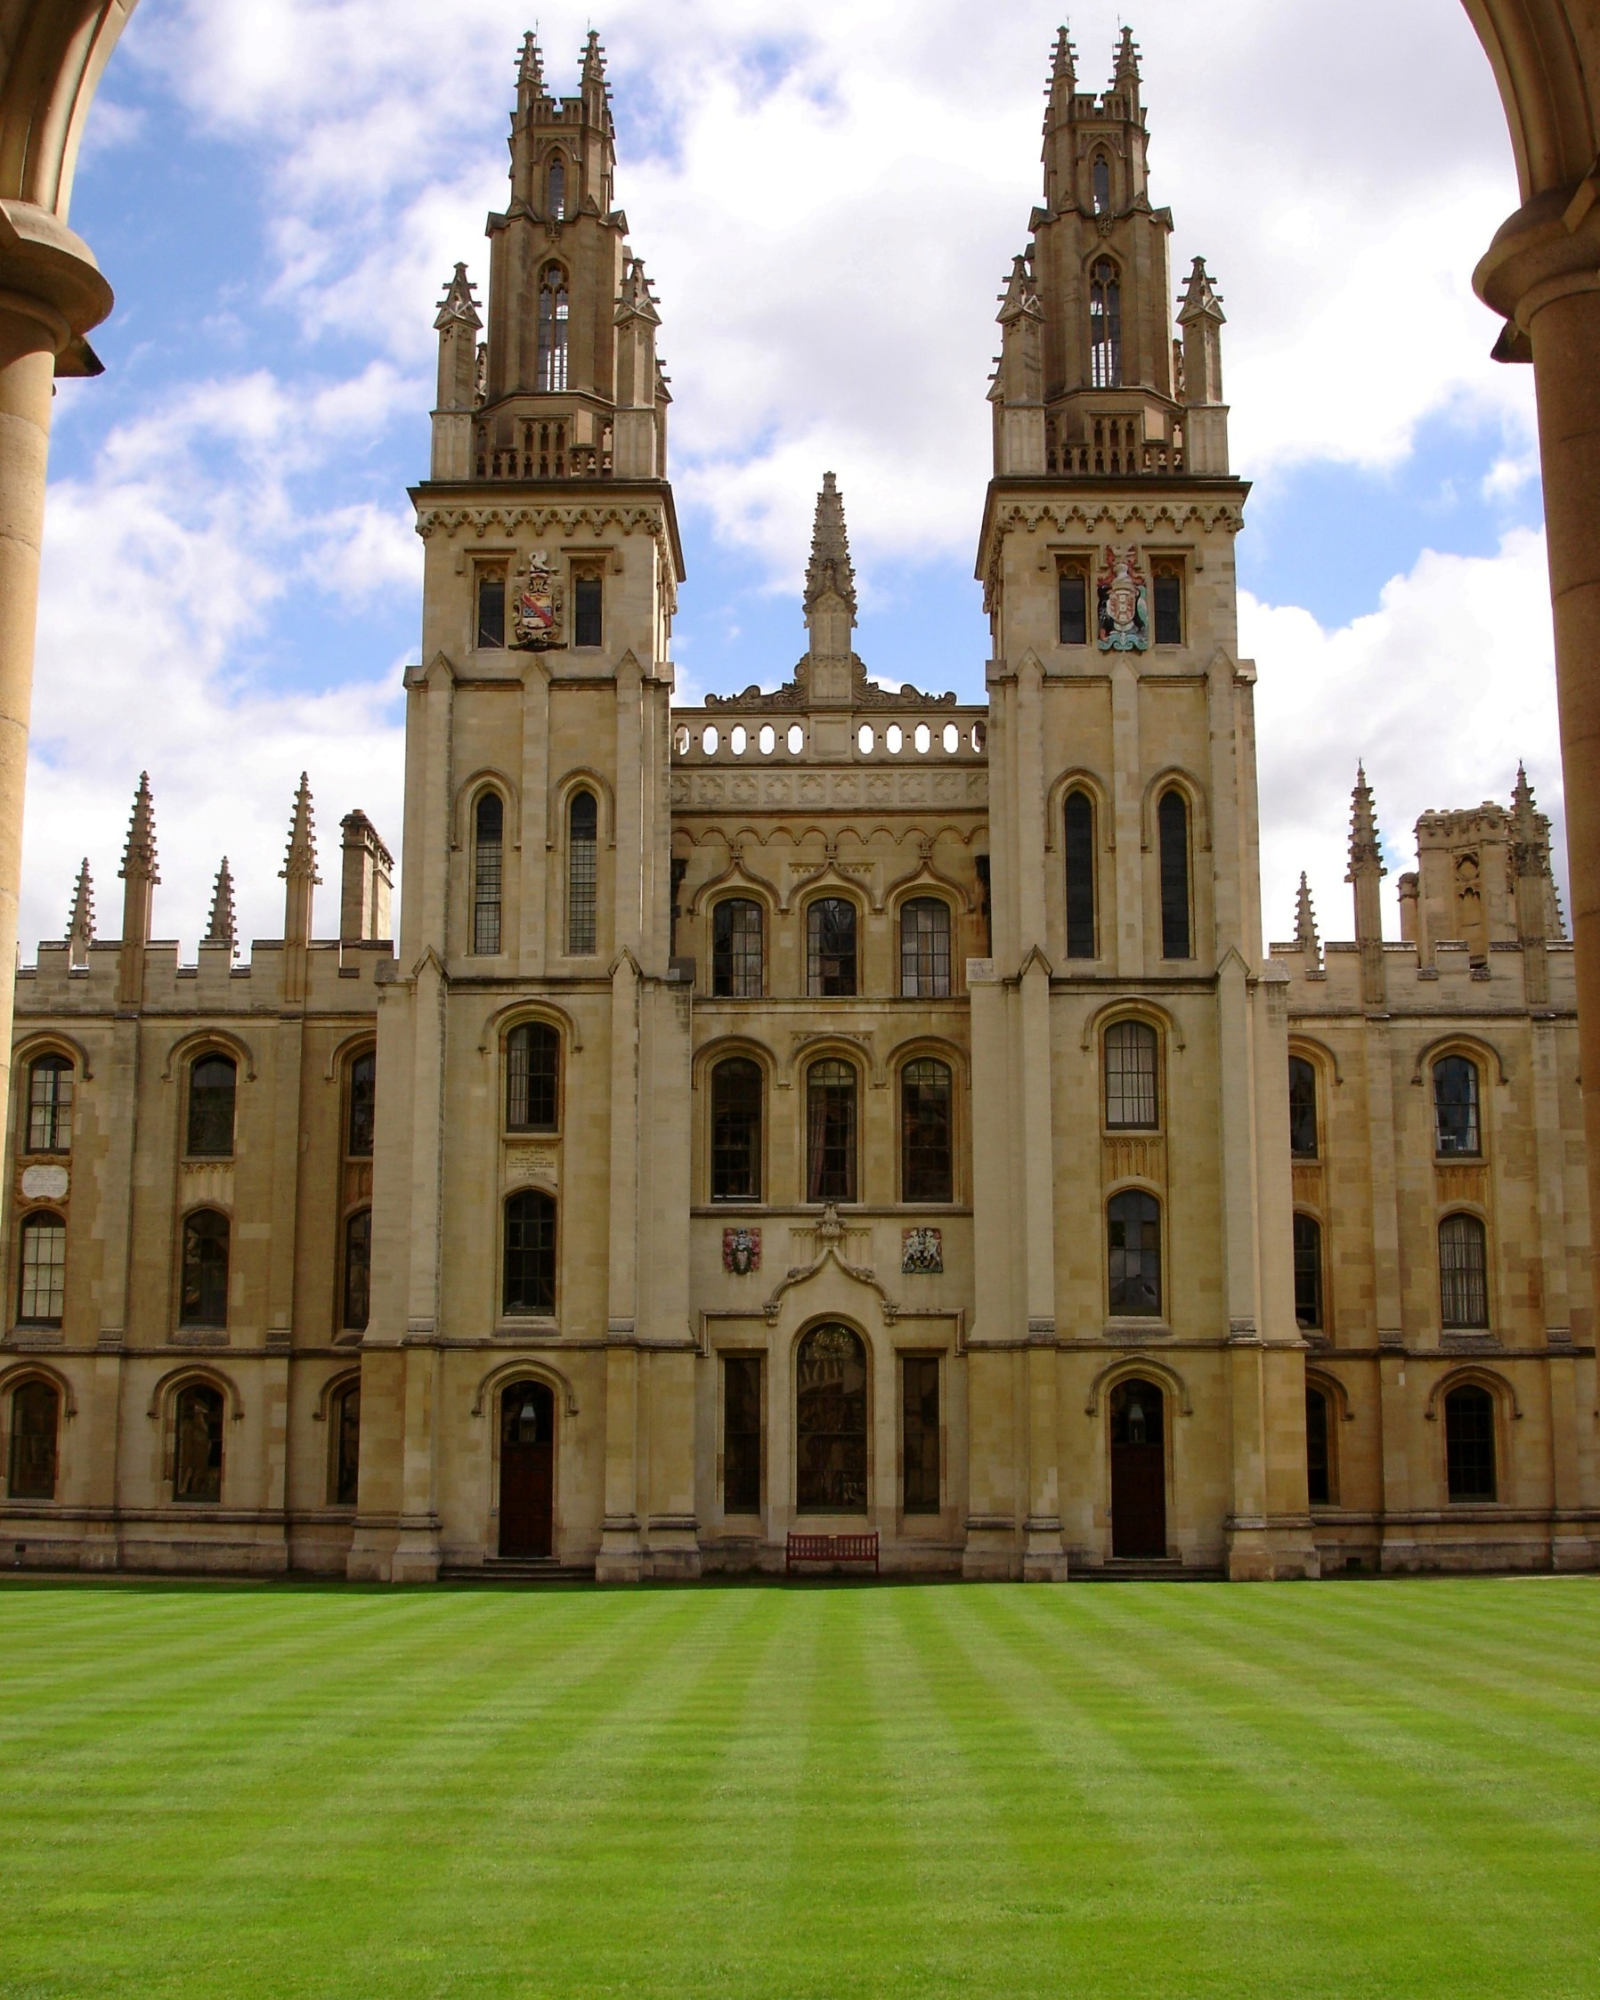 TOP UNIVERSITIES IN THE UK FOR INTERNATIONAL STUDENTS